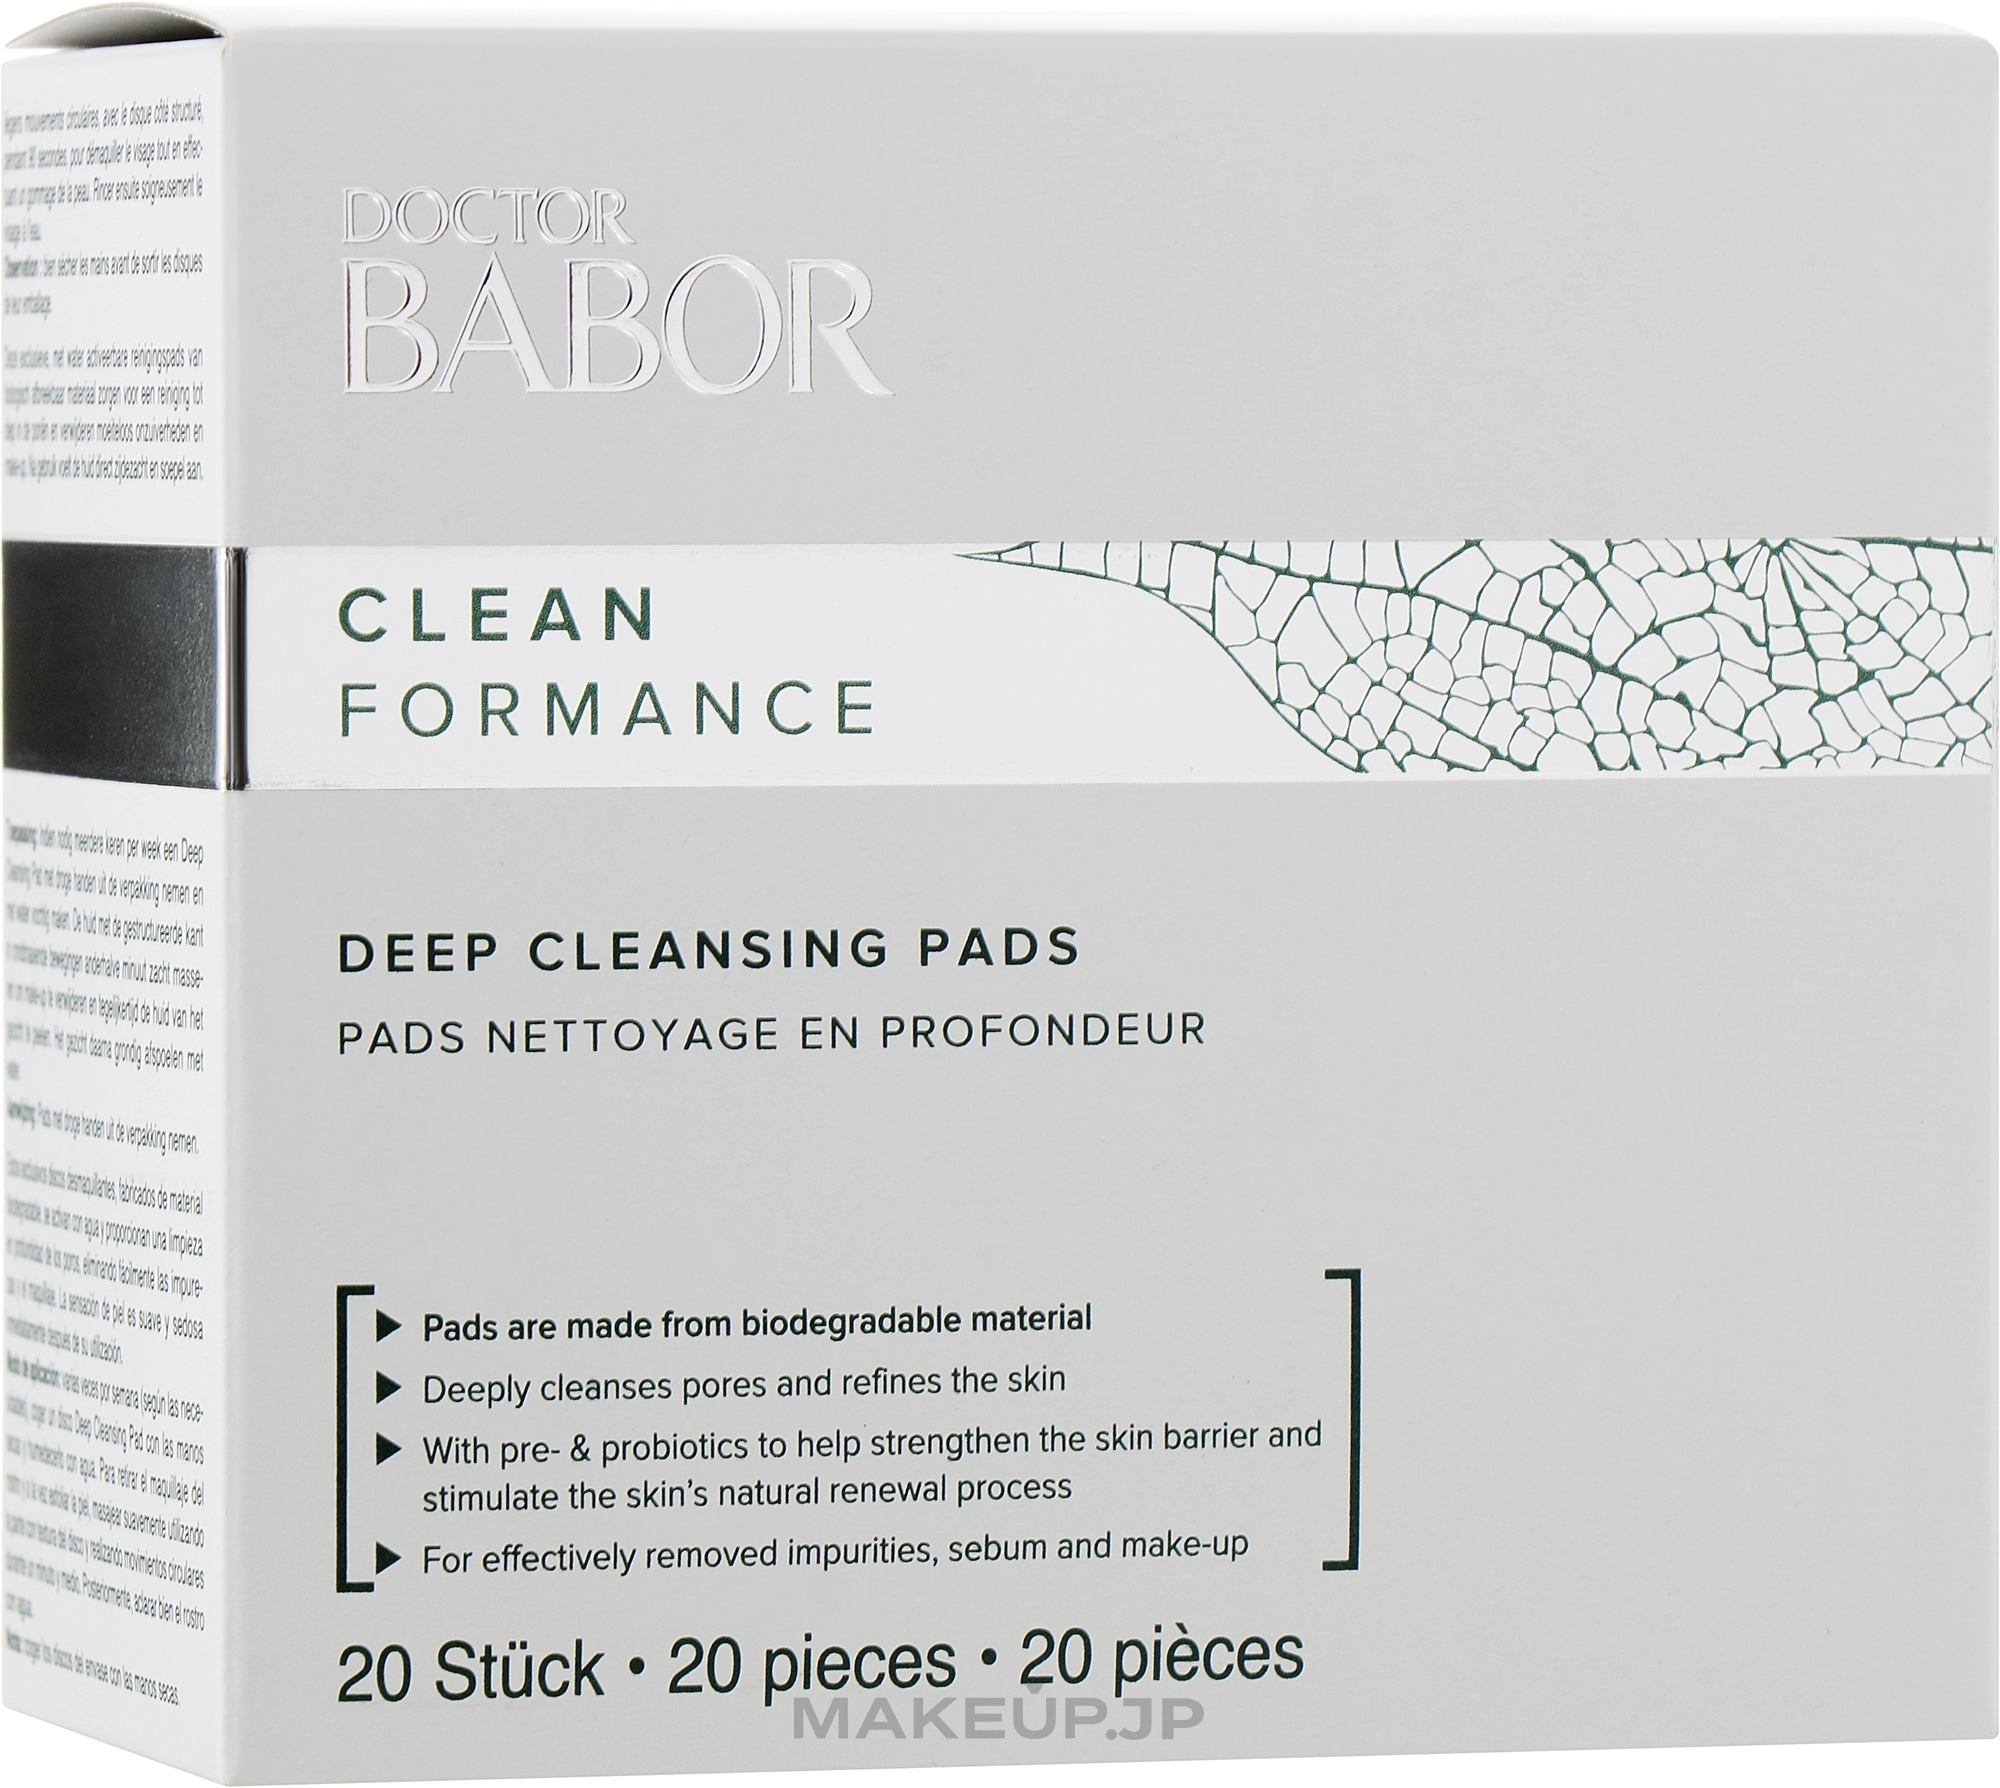 Deep Cleansing Pads - Babor Doctor Babor Clean Formance Deep Cleansing Pads — photo 20 szt.